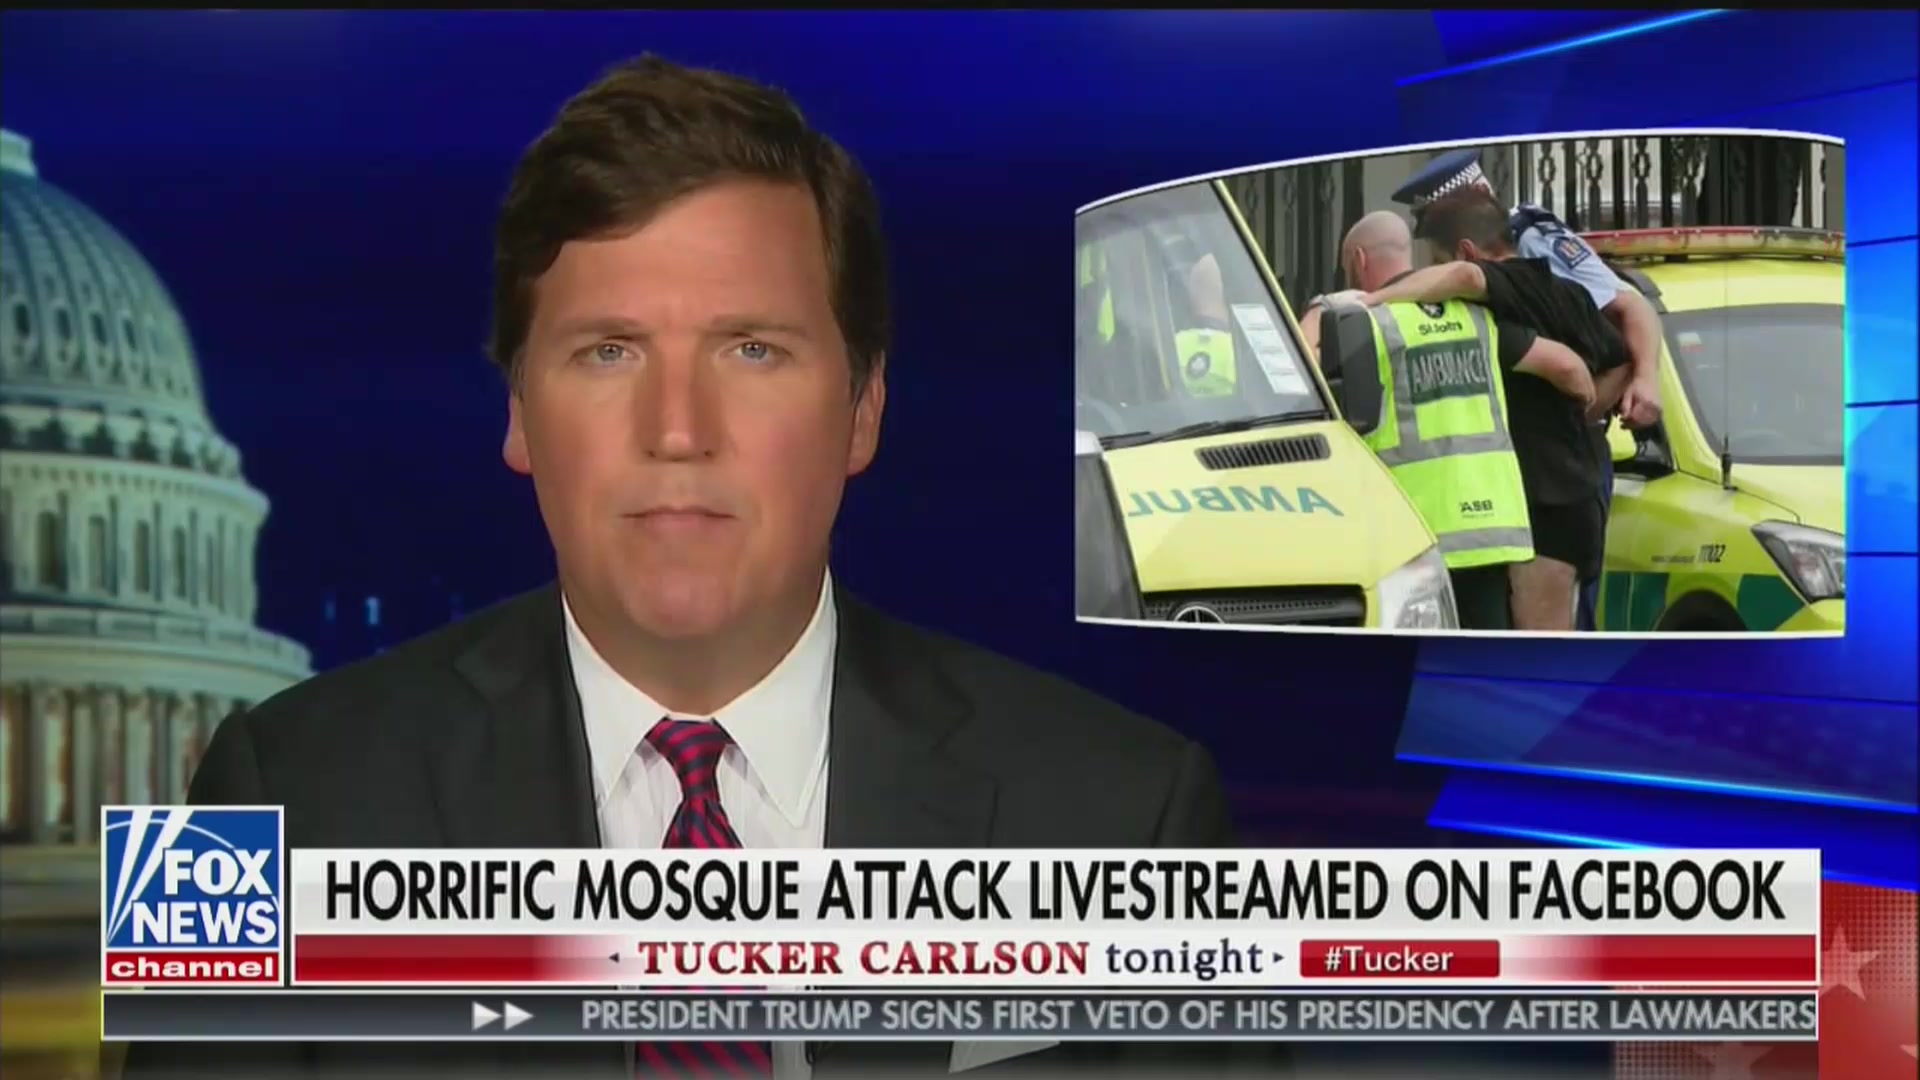 Tucker Carlson Shares New Zealand Shooter’s Photo On-Air, Uses Massacre to Attack AOC